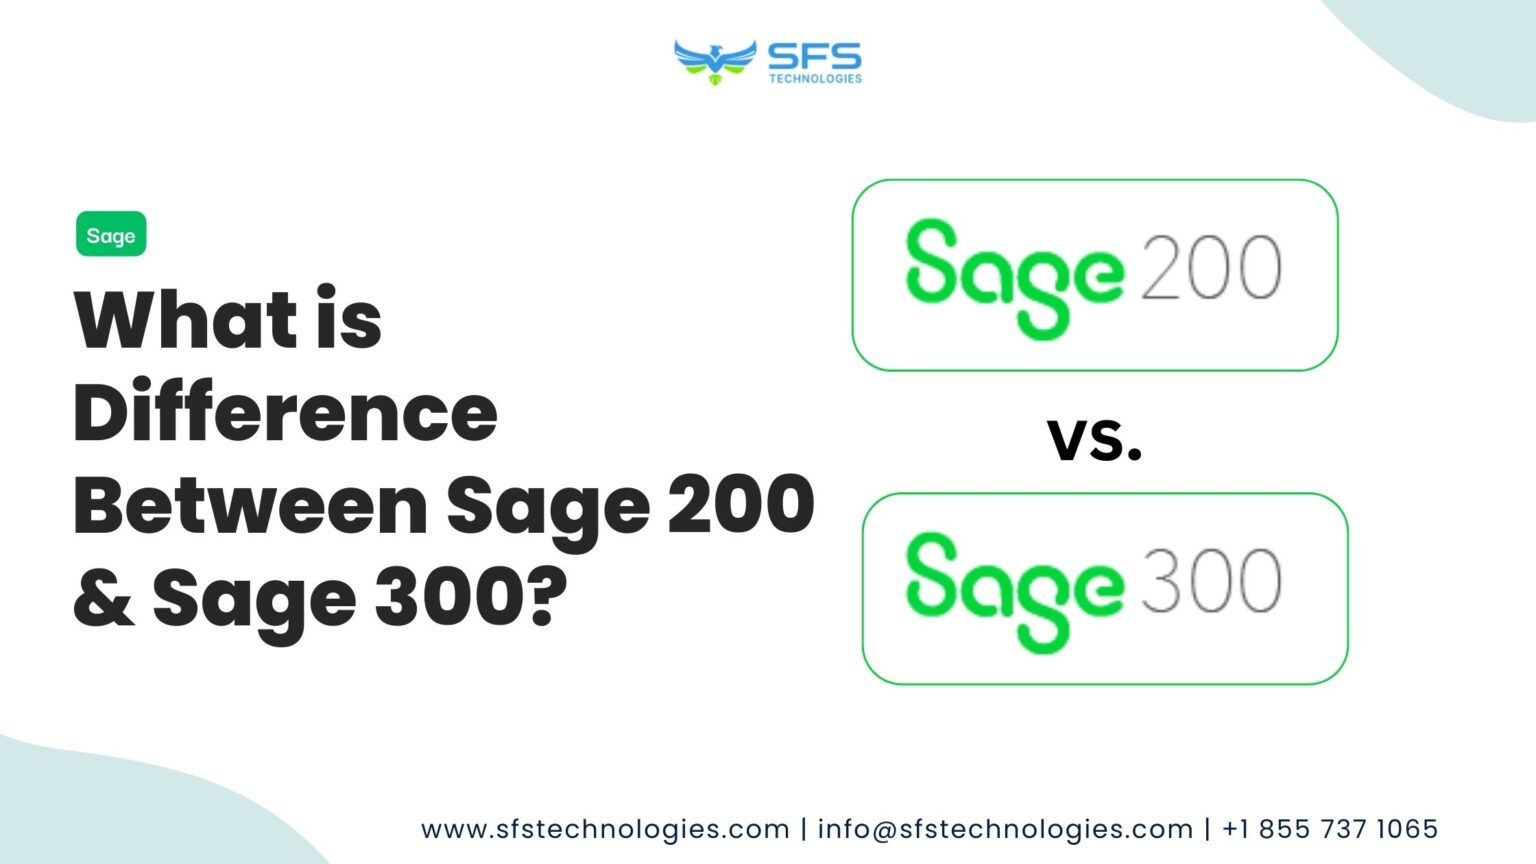 Difference between Sage 200 and Sage 300